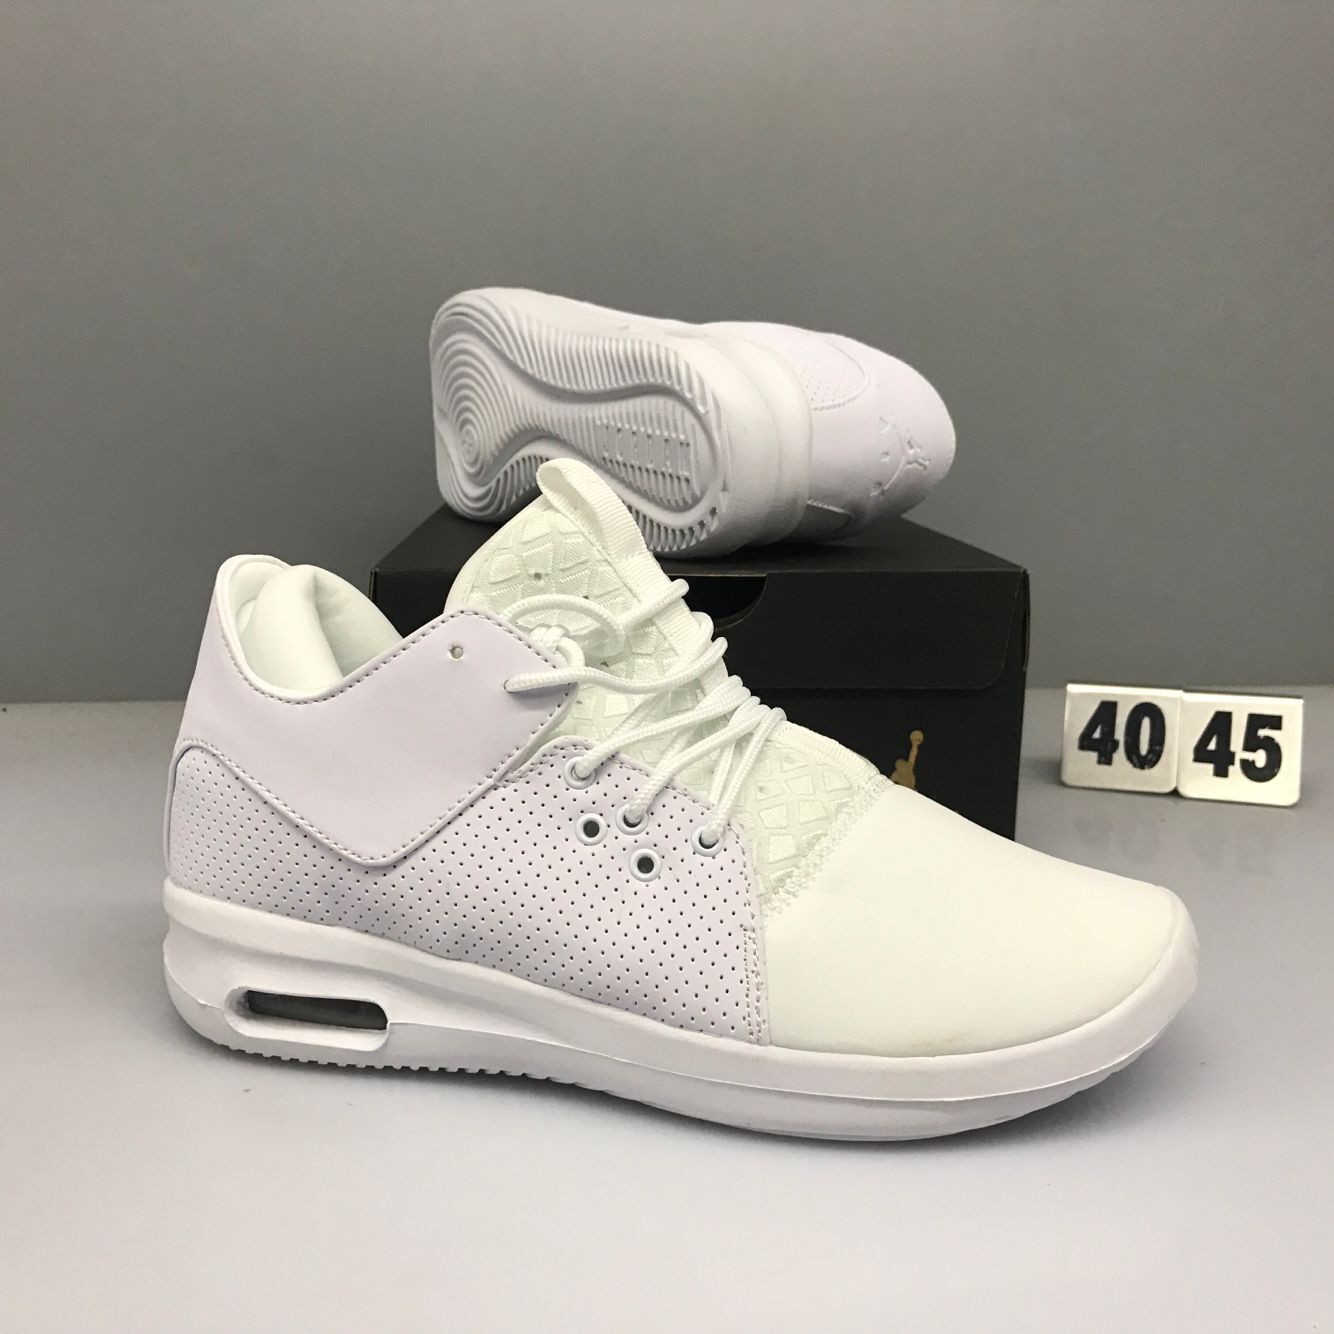 Nike Air Jordan First Classic All White Running Shoes - Click Image to Close